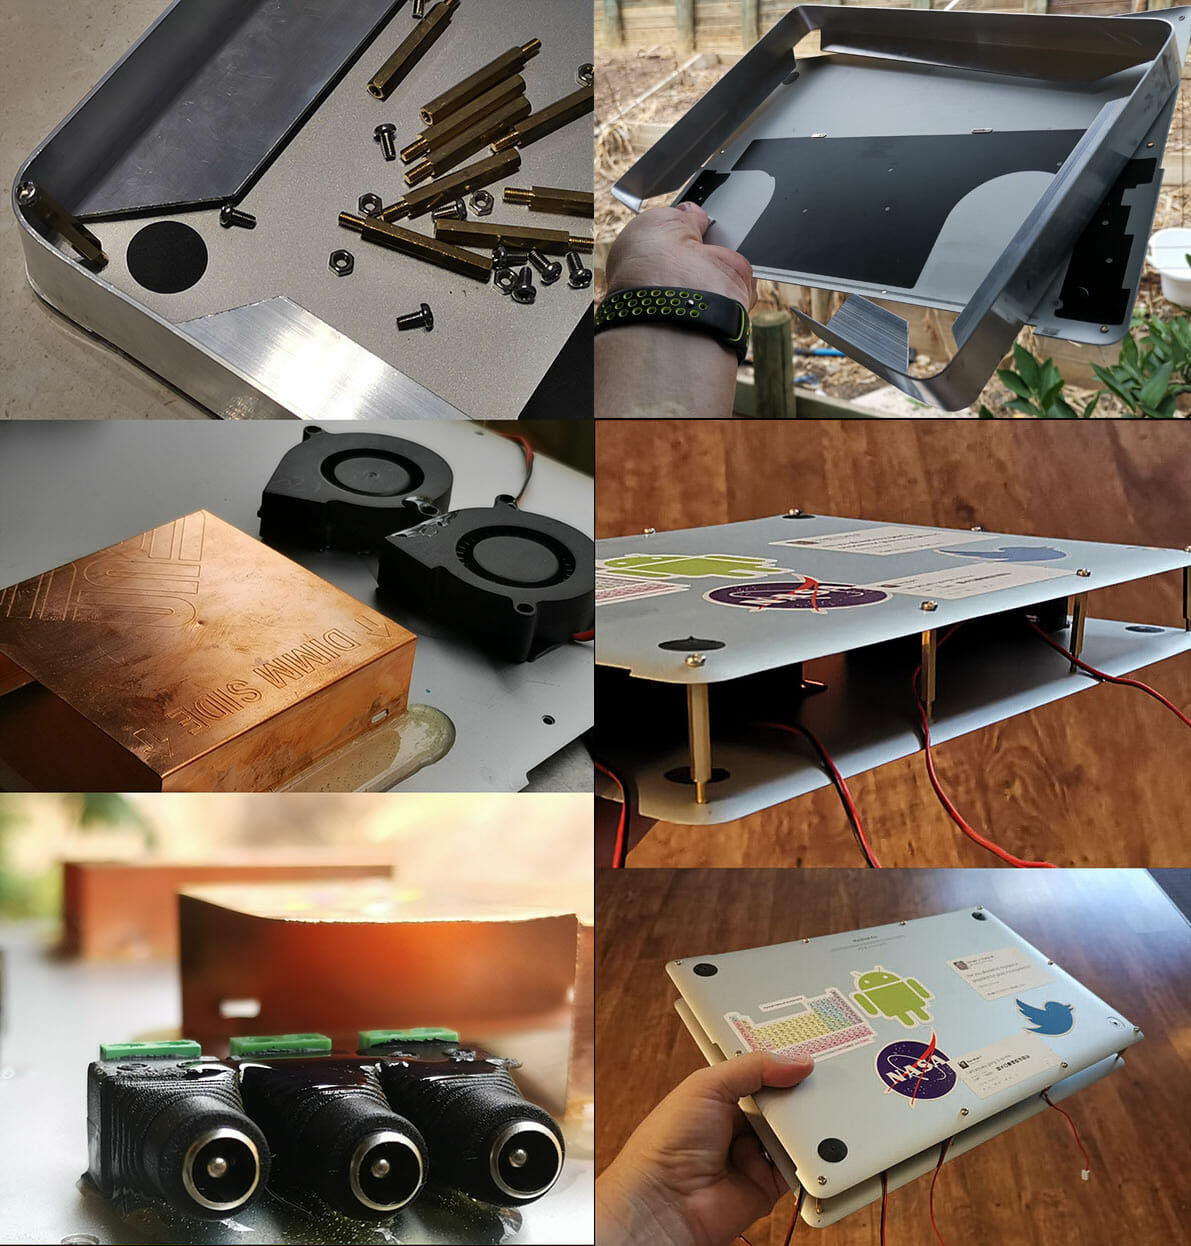 Collage of base assembly, screws and wires